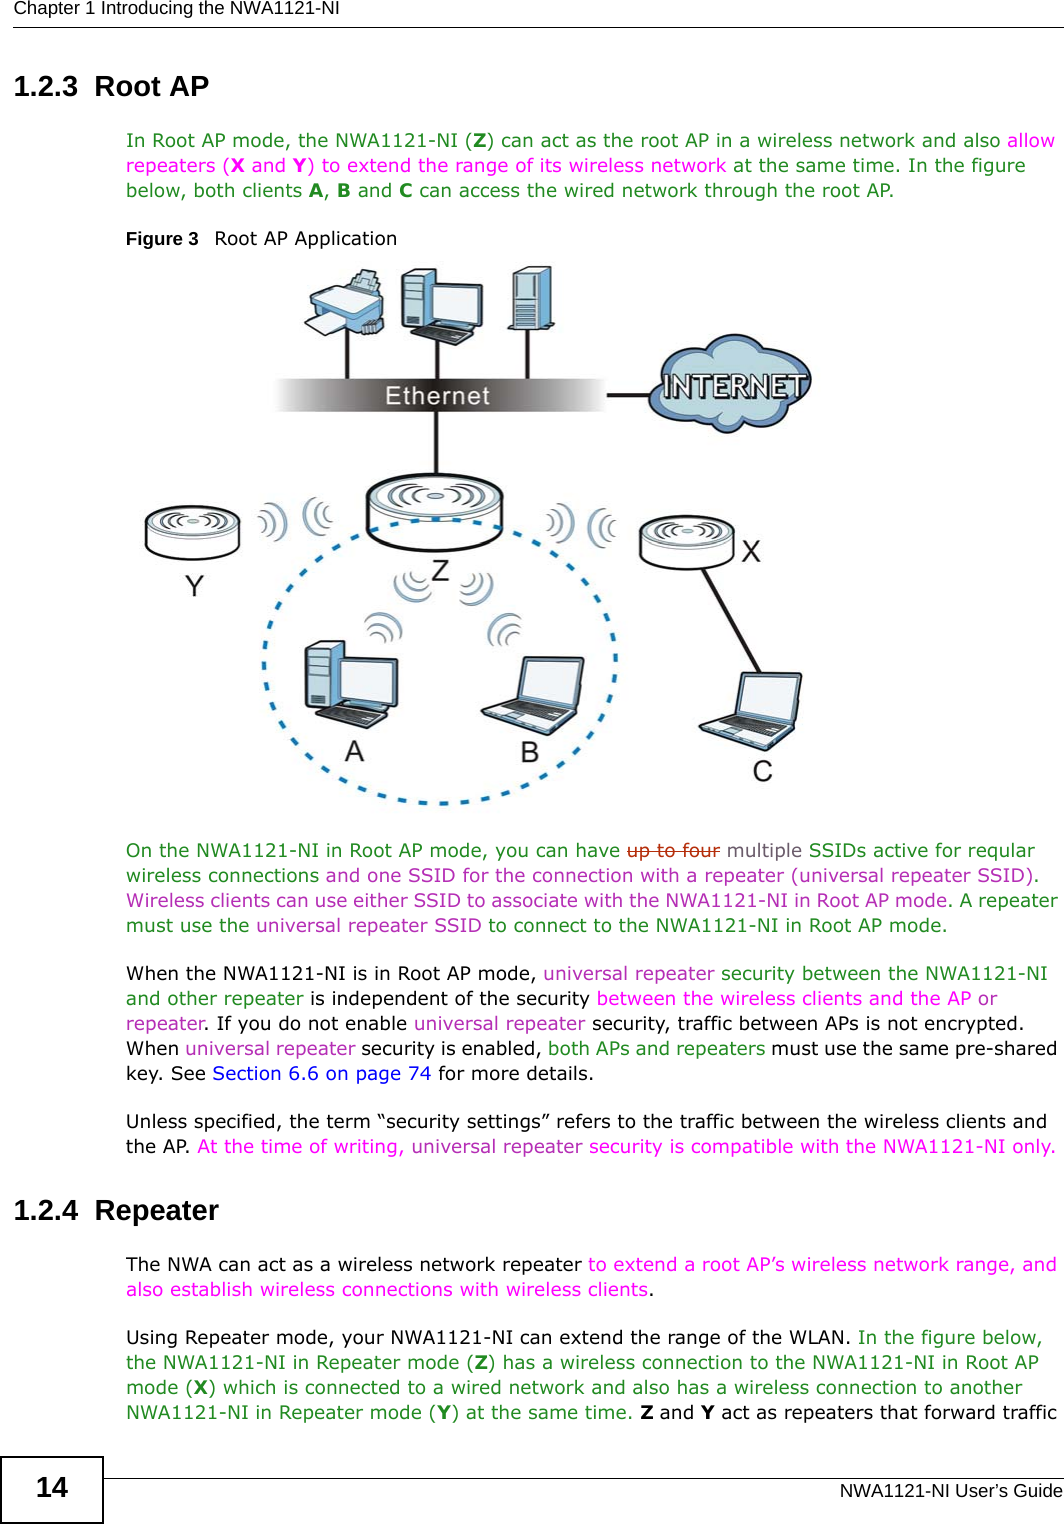 Chapter 1 Introducing the NWA1121-NINWA1121-NI User’s Guide141.2.3  Root APIn Root AP mode, the NWA1121-NI (Z) can act as the root AP in a wireless network and also allow repeaters (X and Y) to extend the range of its wireless network at the same time. In the figure below, both clients A, B and C can access the wired network through the root AP.Figure 3   Root AP Application On the NWA1121-NI in Root AP mode, you can have up to four multiple SSIDs active for reqular wireless connections and one SSID for the connection with a repeater (universal repeater SSID). Wireless clients can use either SSID to associate with the NWA1121-NI in Root AP mode. A repeater must use the universal repeater SSID to connect to the NWA1121-NI in Root AP mode.When the NWA1121-NI is in Root AP mode, universal repeater security between the NWA1121-NI and other repeater is independent of the security between the wireless clients and the AP or repeater. If you do not enable universal repeater security, traffic between APs is not encrypted. When universal repeater security is enabled, both APs and repeaters must use the same pre-shared key. See Section 6.6 on page 74 for more details.Unless specified, the term “security settings” refers to the traffic between the wireless clients and the AP. At the time of writing, universal repeater security is compatible with the NWA1121-NI only. 1.2.4  RepeaterThe NWA can act as a wireless network repeater to extend a root AP’s wireless network range, and also establish wireless connections with wireless clients. Using Repeater mode, your NWA1121-NI can extend the range of the WLAN. In the figure below, the NWA1121-NI in Repeater mode (Z) has a wireless connection to the NWA1121-NI in Root AP mode (X) which is connected to a wired network and also has a wireless connection to another NWA1121-NI in Repeater mode (Y) at the same time. Z and Y act as repeaters that forward traffic 